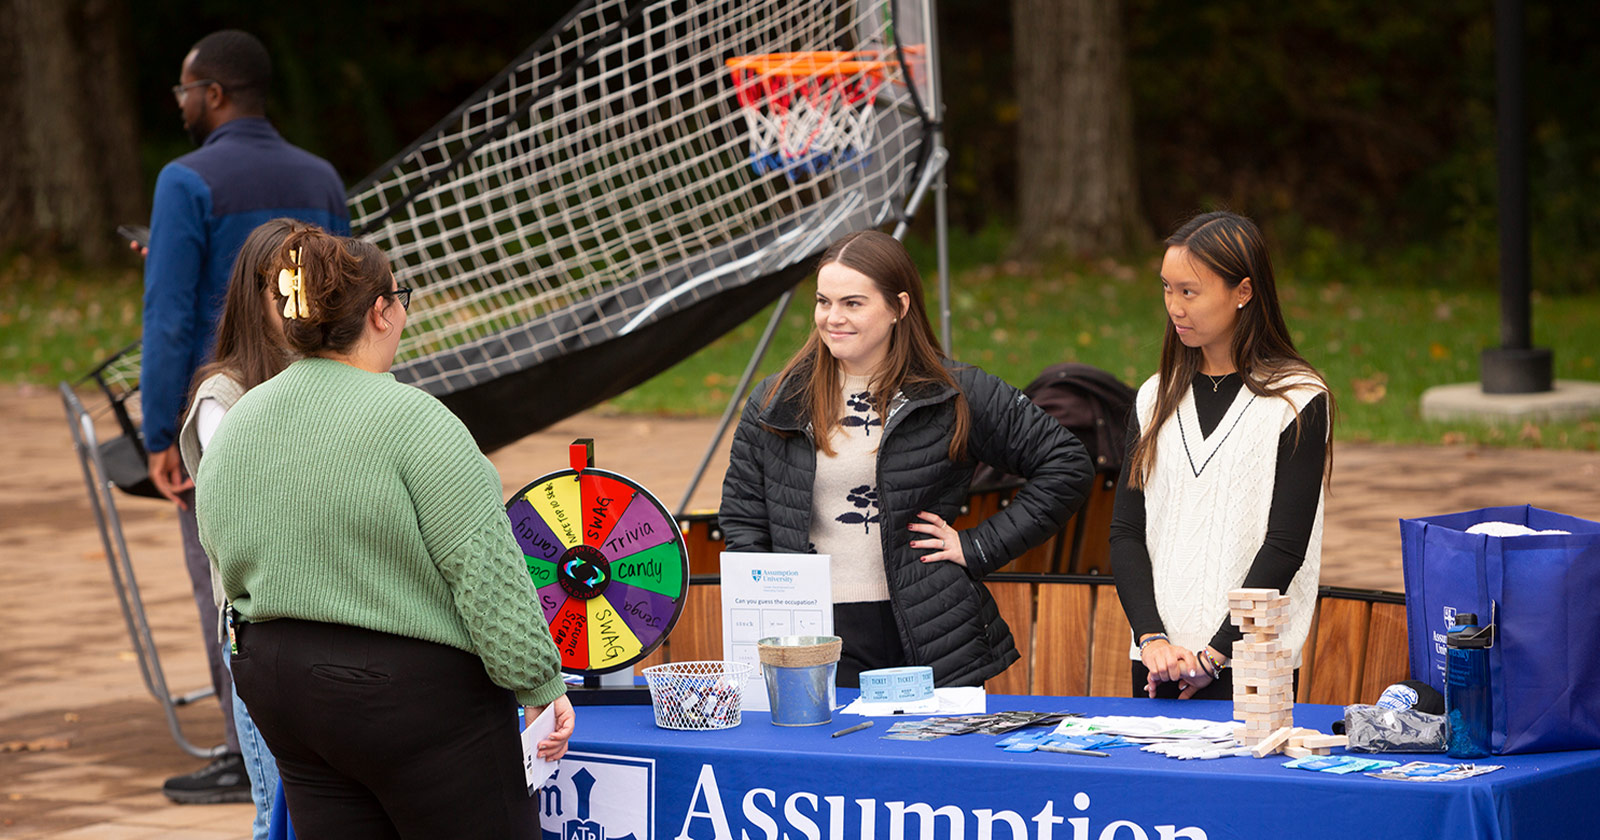 Two students work at an Assumption University event.